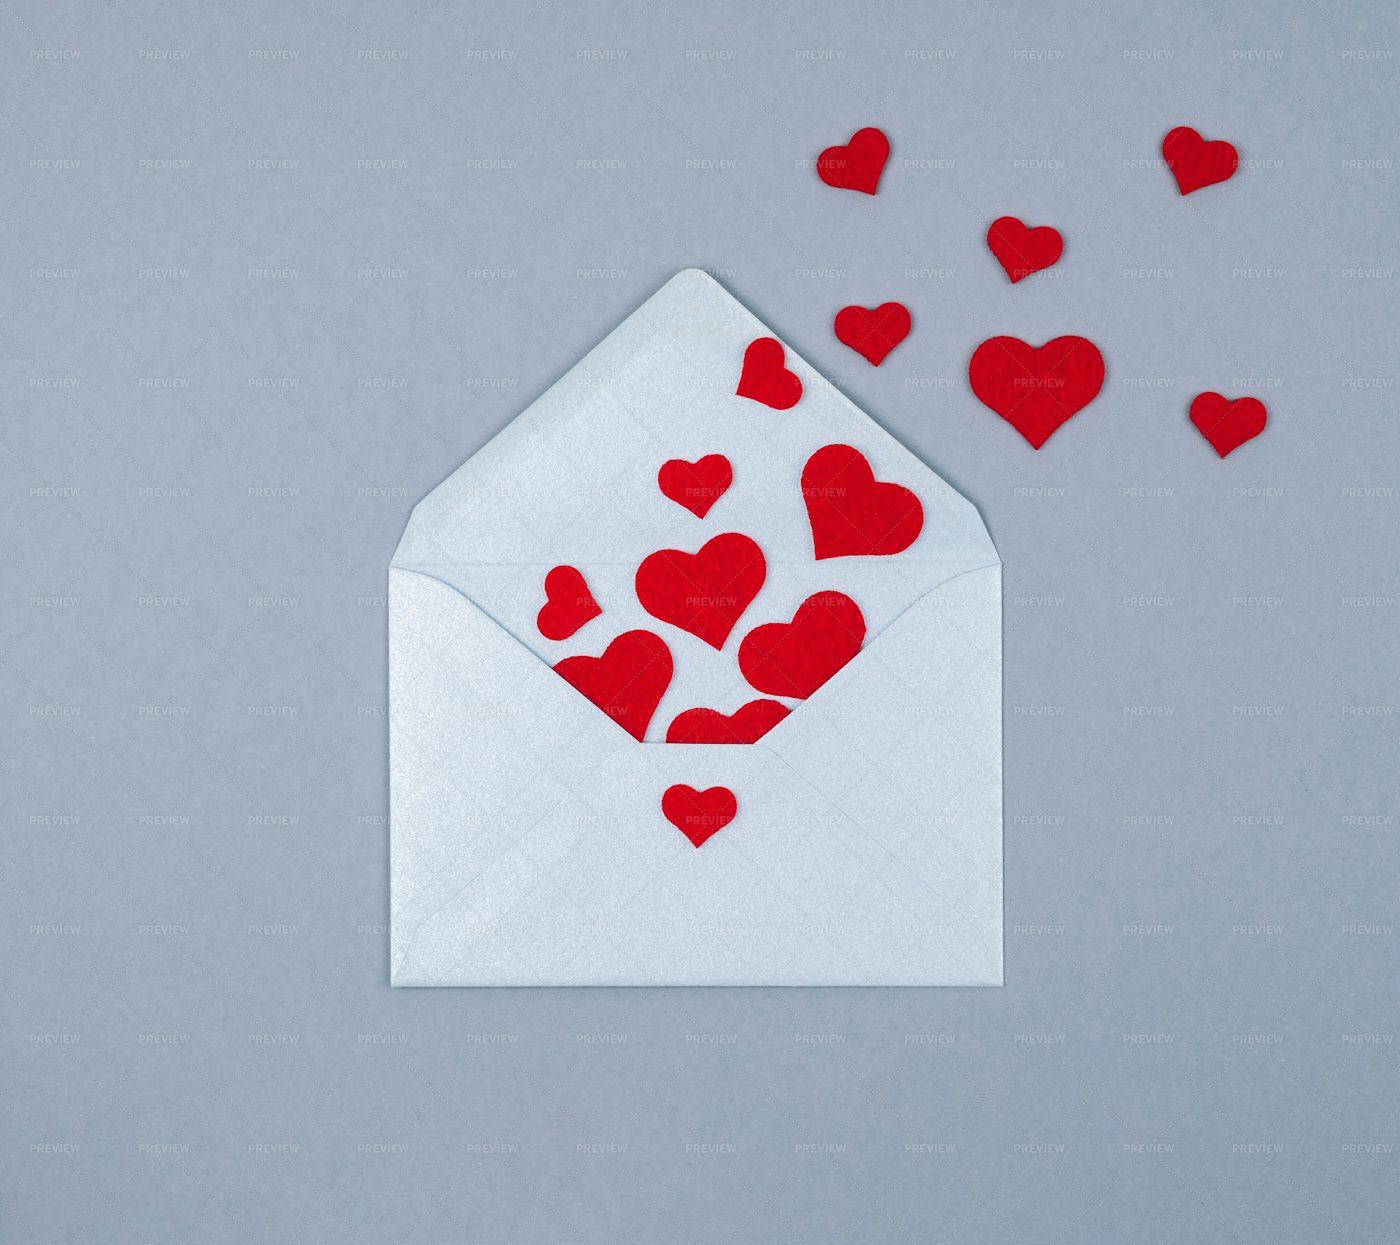 Hearts Flying From Silver Envelope: Stock Photos